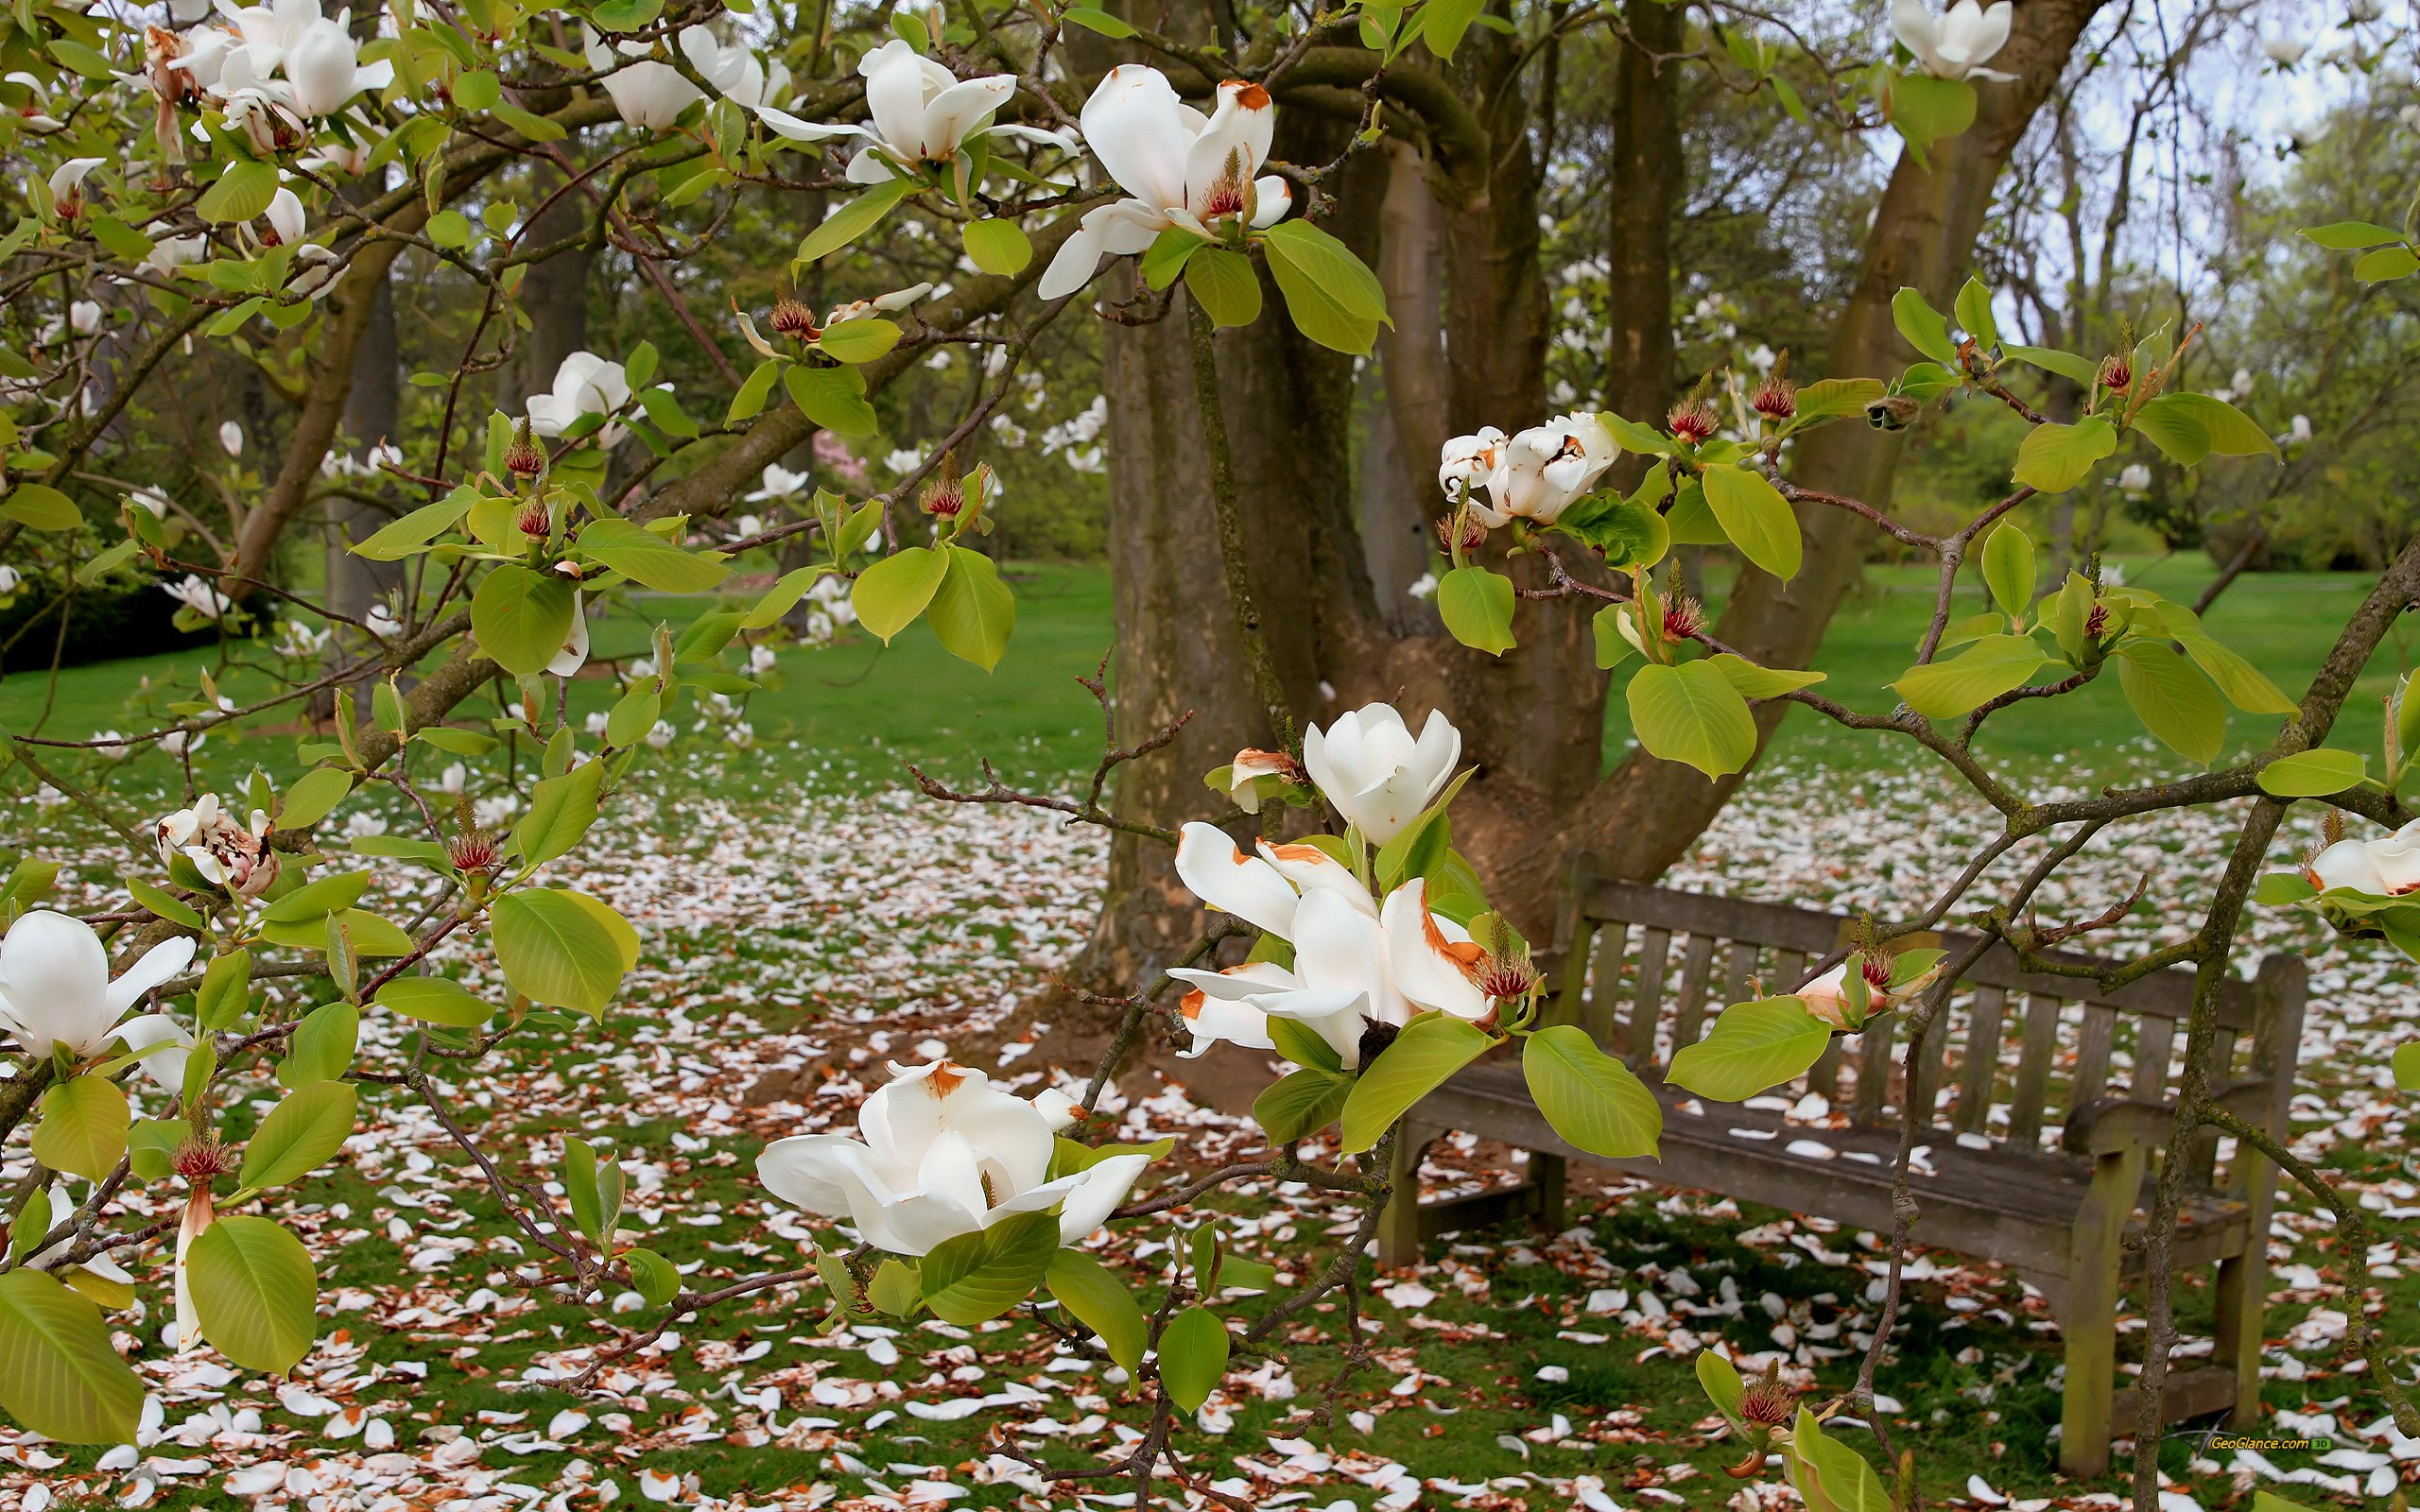 General 2560x1600 trees flowers bench grass magnolia spring summer